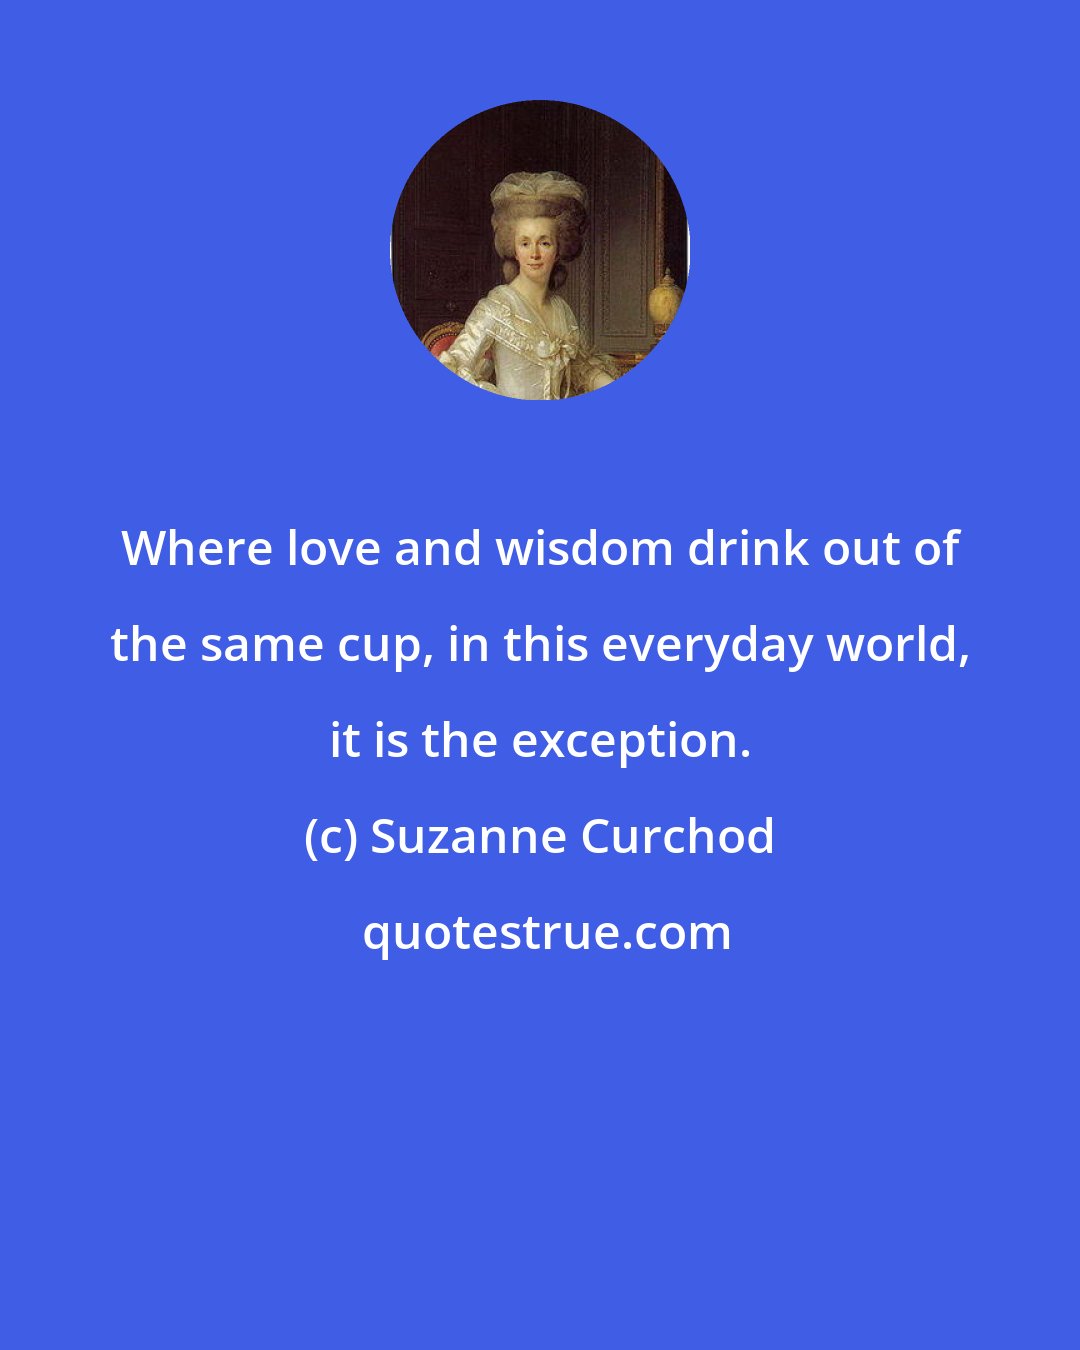 Suzanne Curchod: Where love and wisdom drink out of the same cup, in this everyday world, it is the exception.